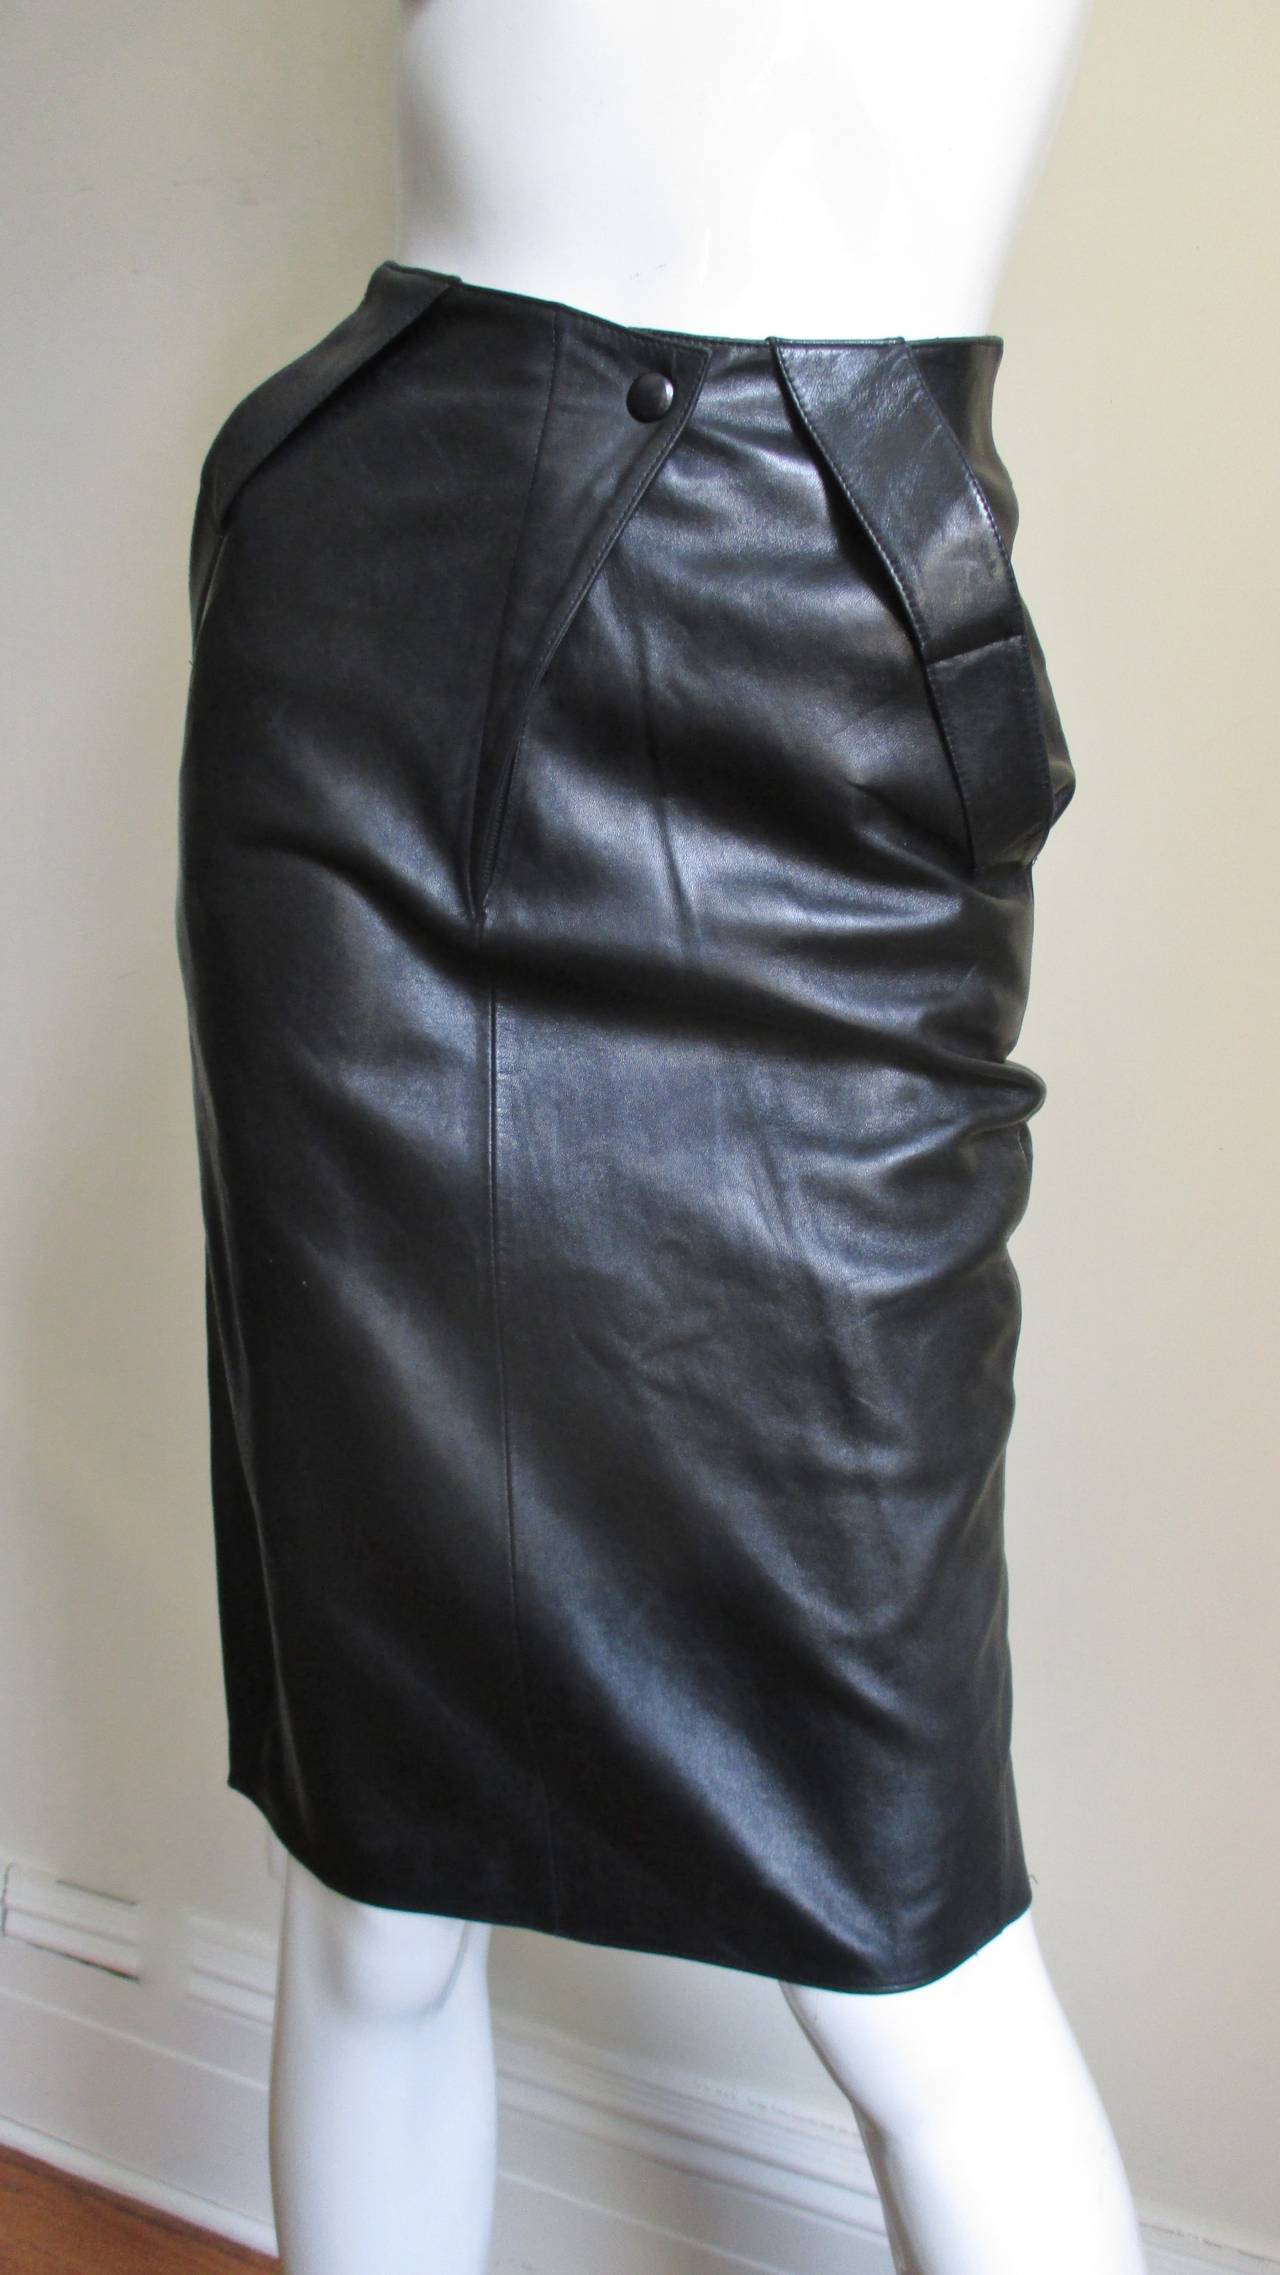 A fabulous black leather skirt from Claude Montana with a back drape.  It is form fitting with a with center front zipper and a black snap and 2 hip pockets.  The back has an incredible dramatic folded draped curved inset at the derriere and it is